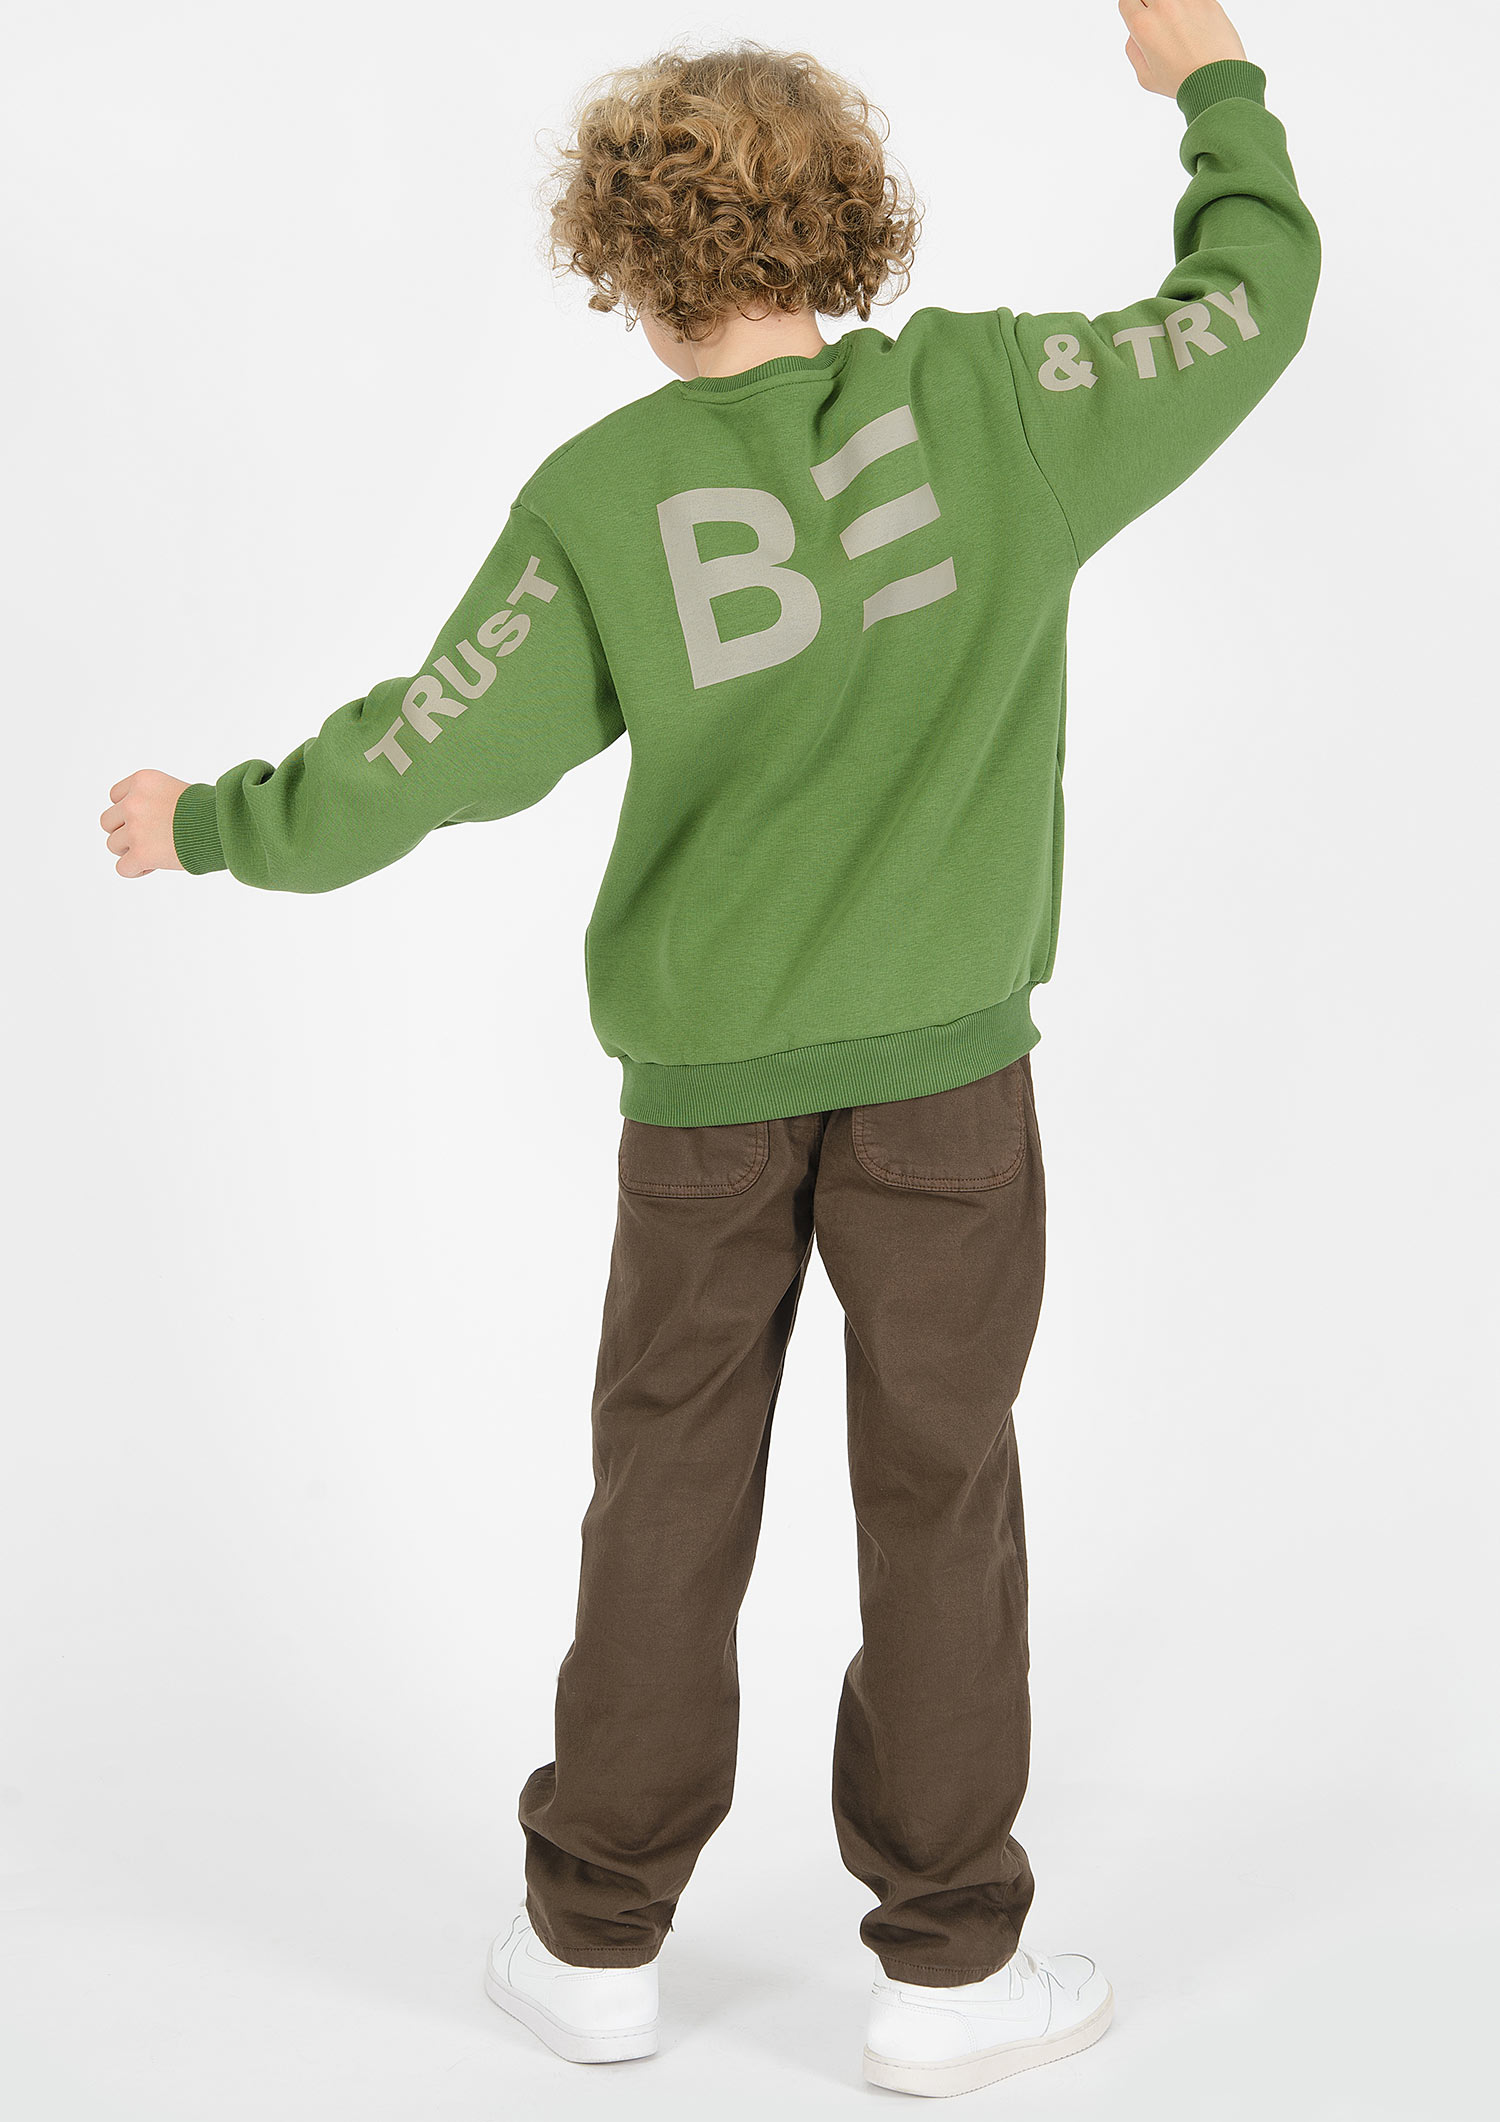 6325-Boys Oversized Sweatshirt -BE Trust and Try